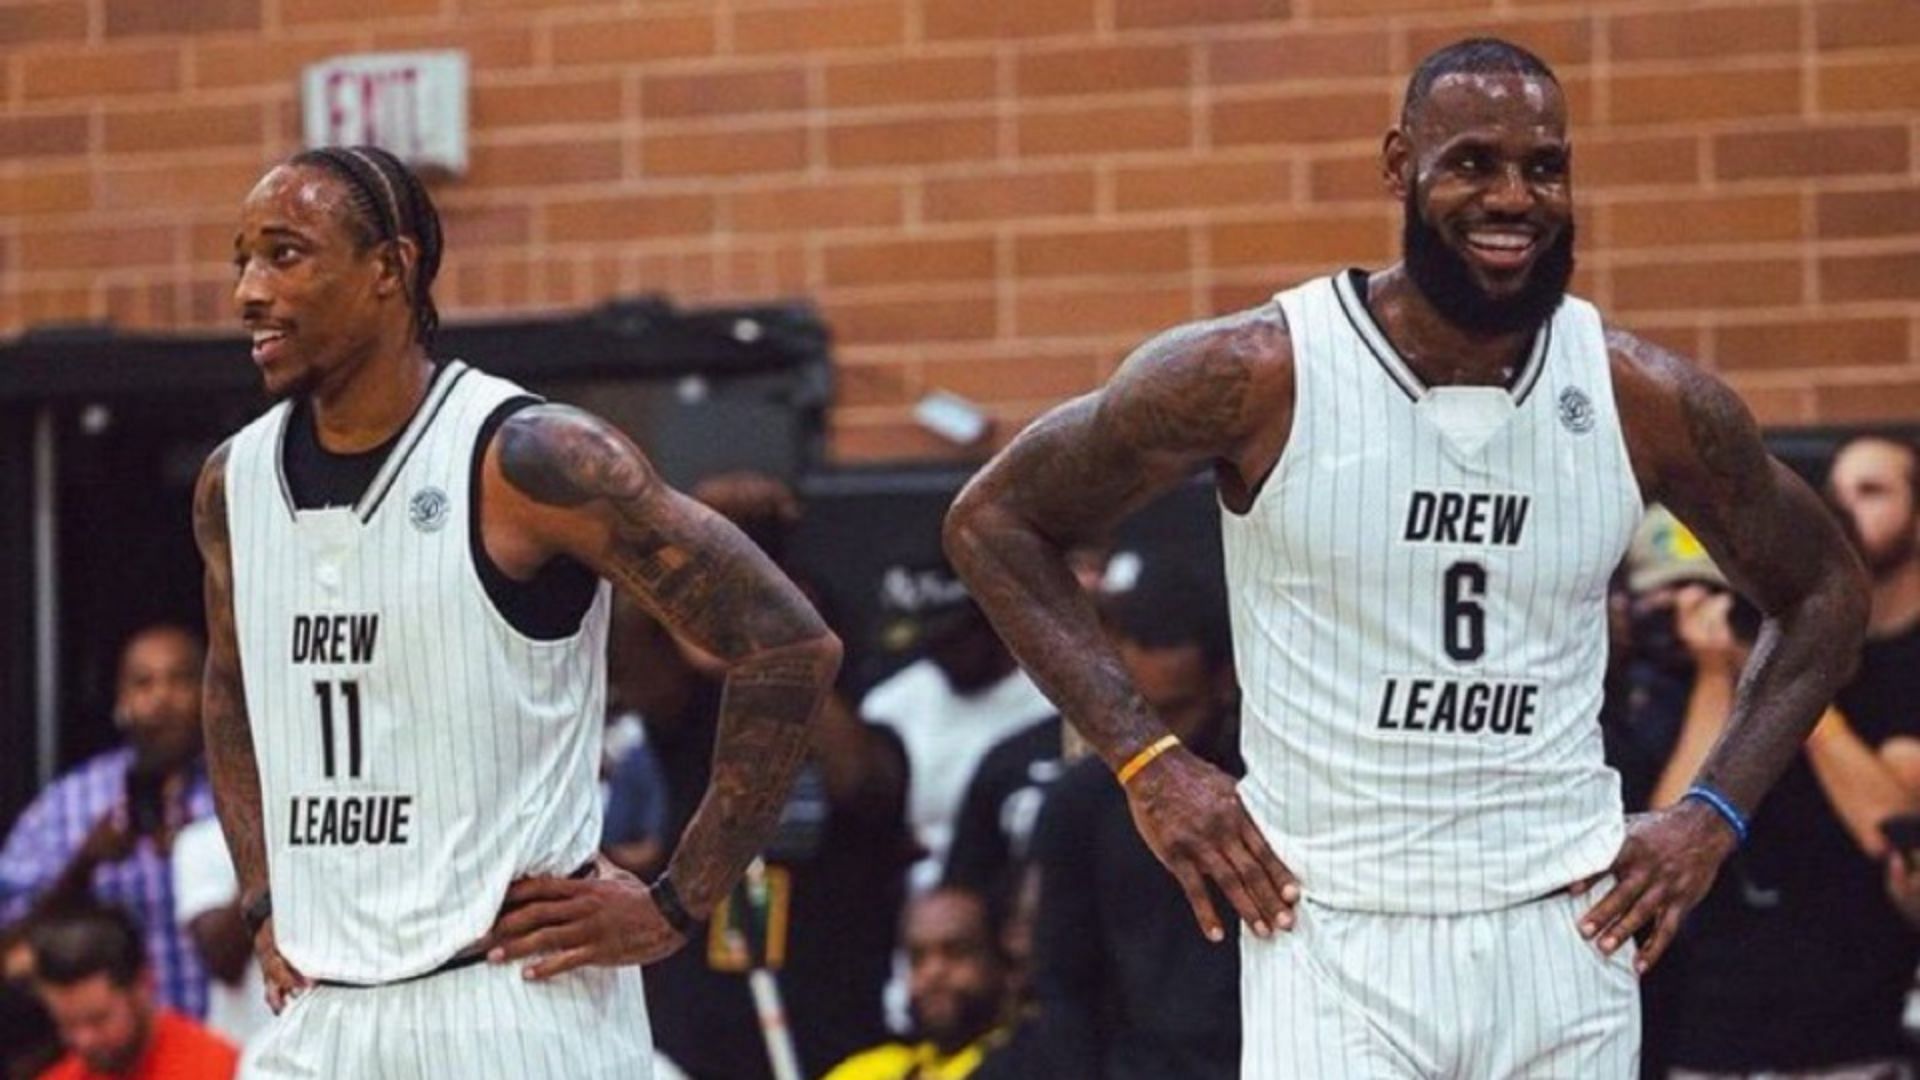 LeBron James and Demar DeRozan team up for the Drew league